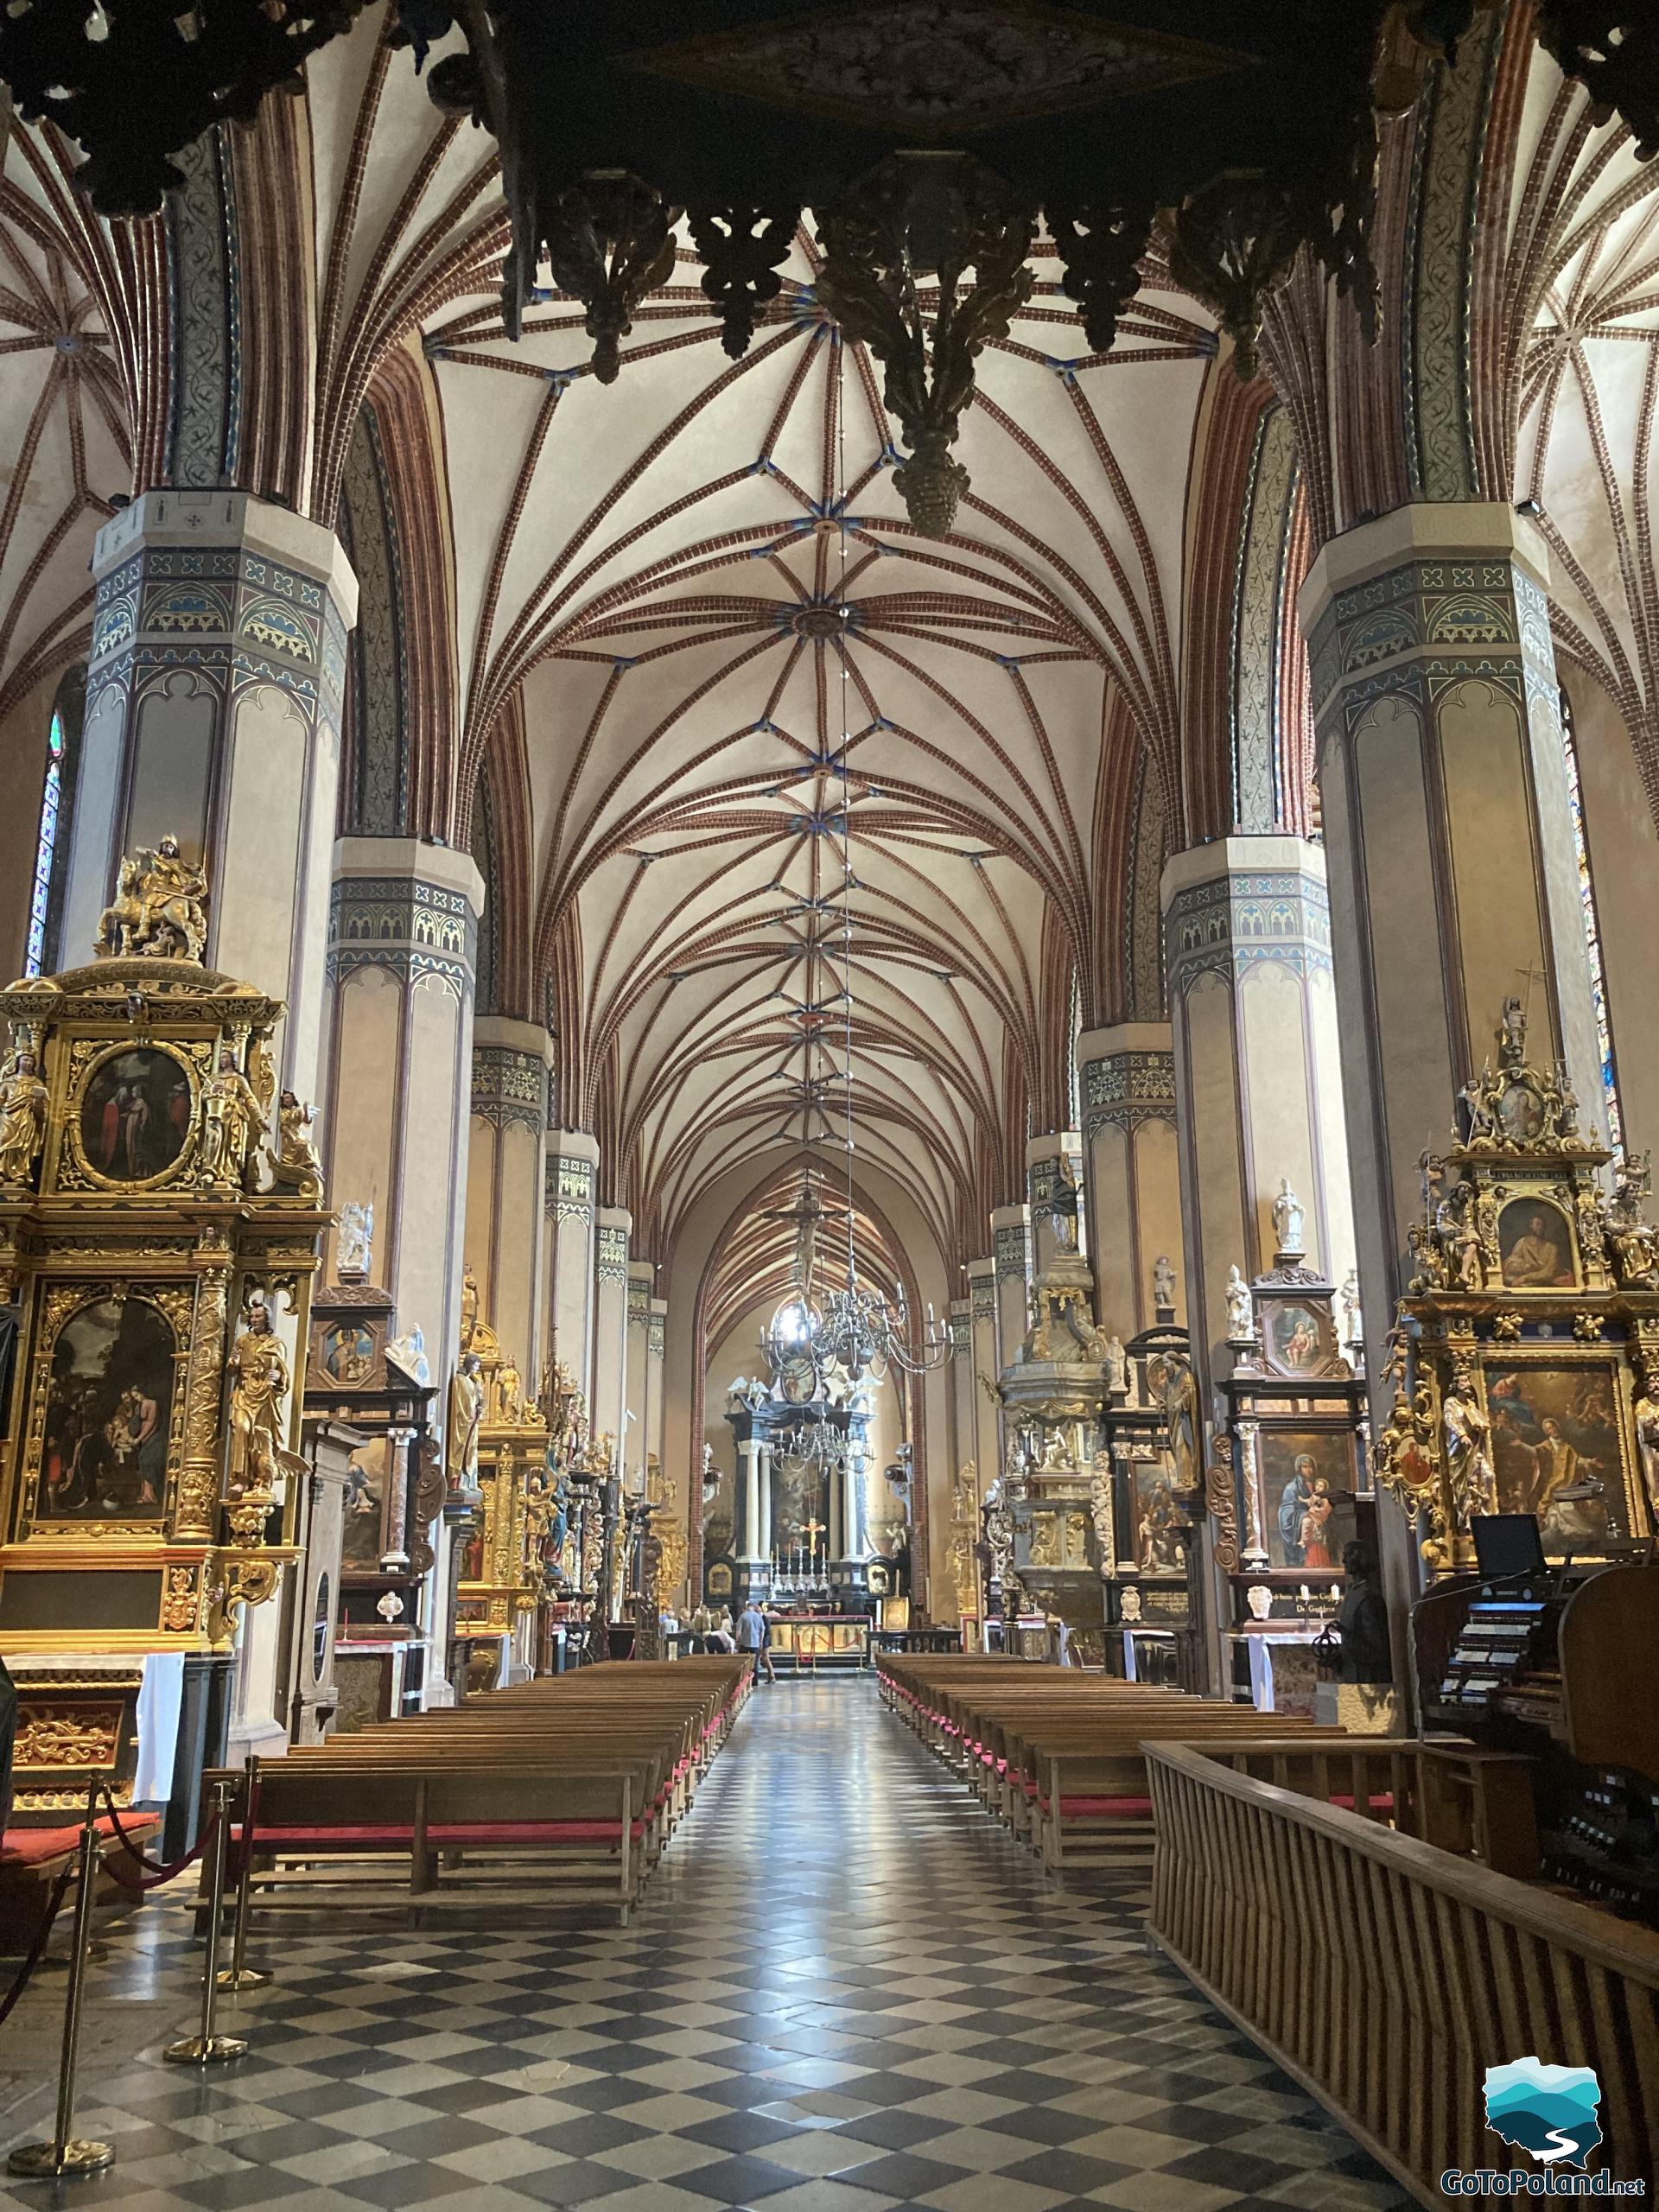 view of the interior of the cathedral, seeing the historic sculptures, the altar, benches